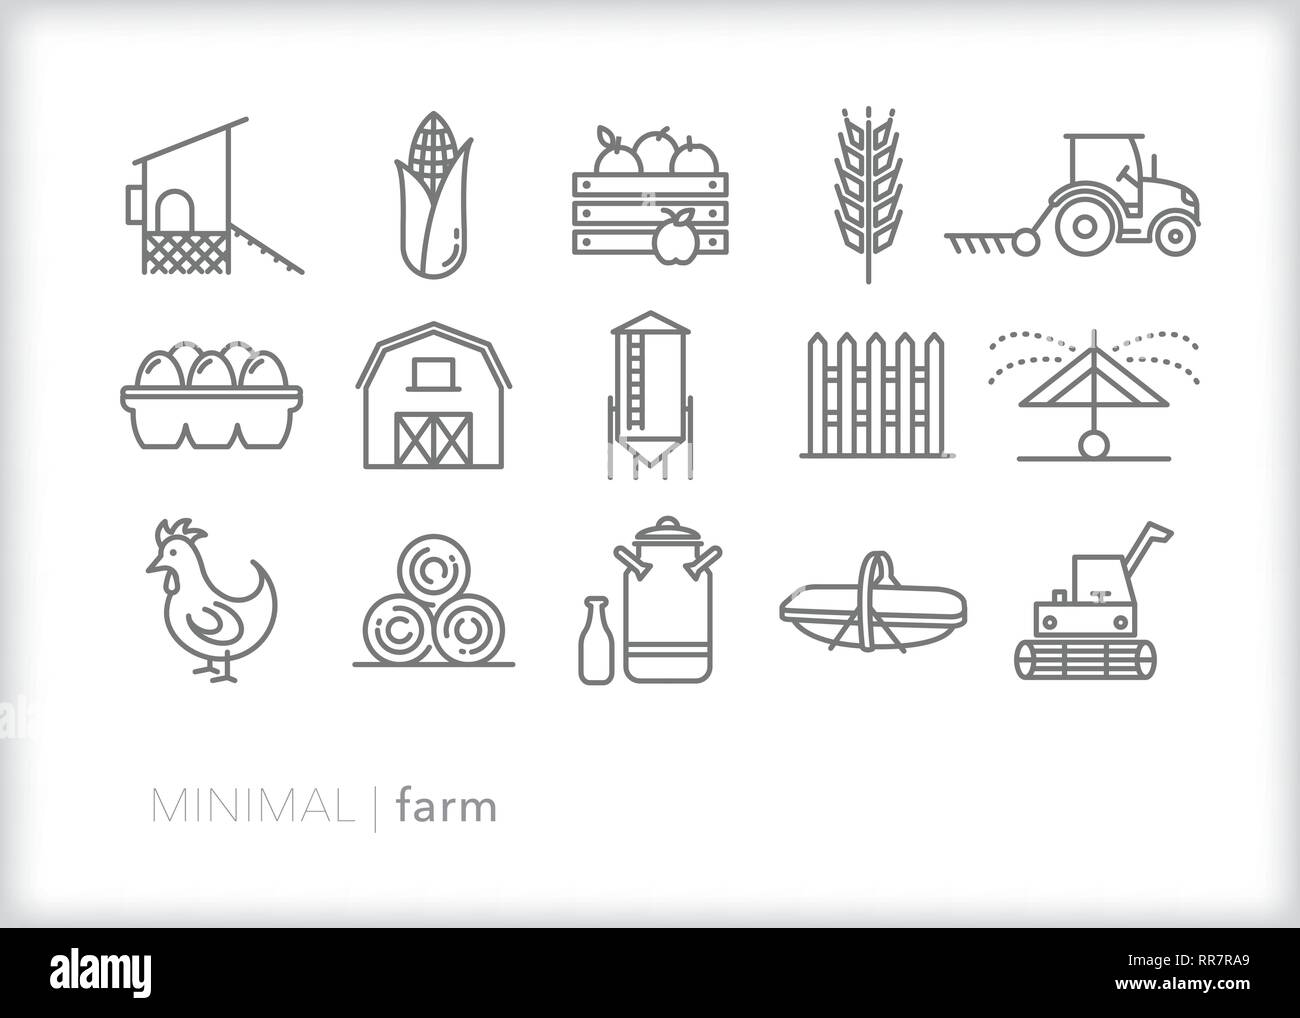 Set of 15 farm line icons for a family farm in a rural area including produce, barn and farm equipment Stock Vector